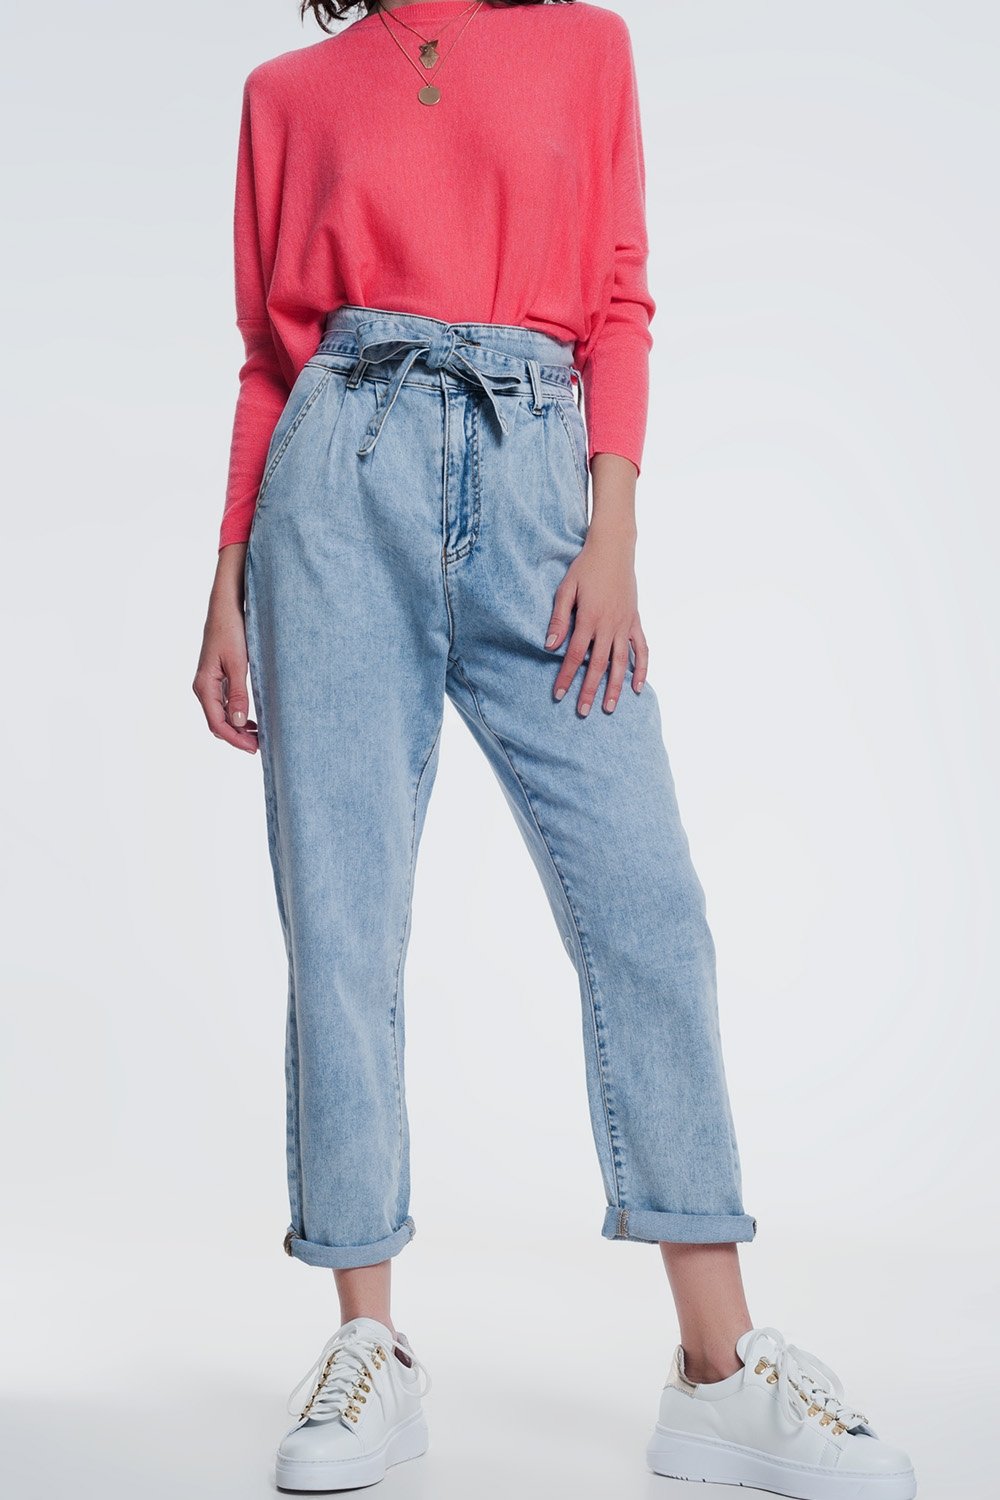 Straight Cut Jeans in Light Denim With Belt